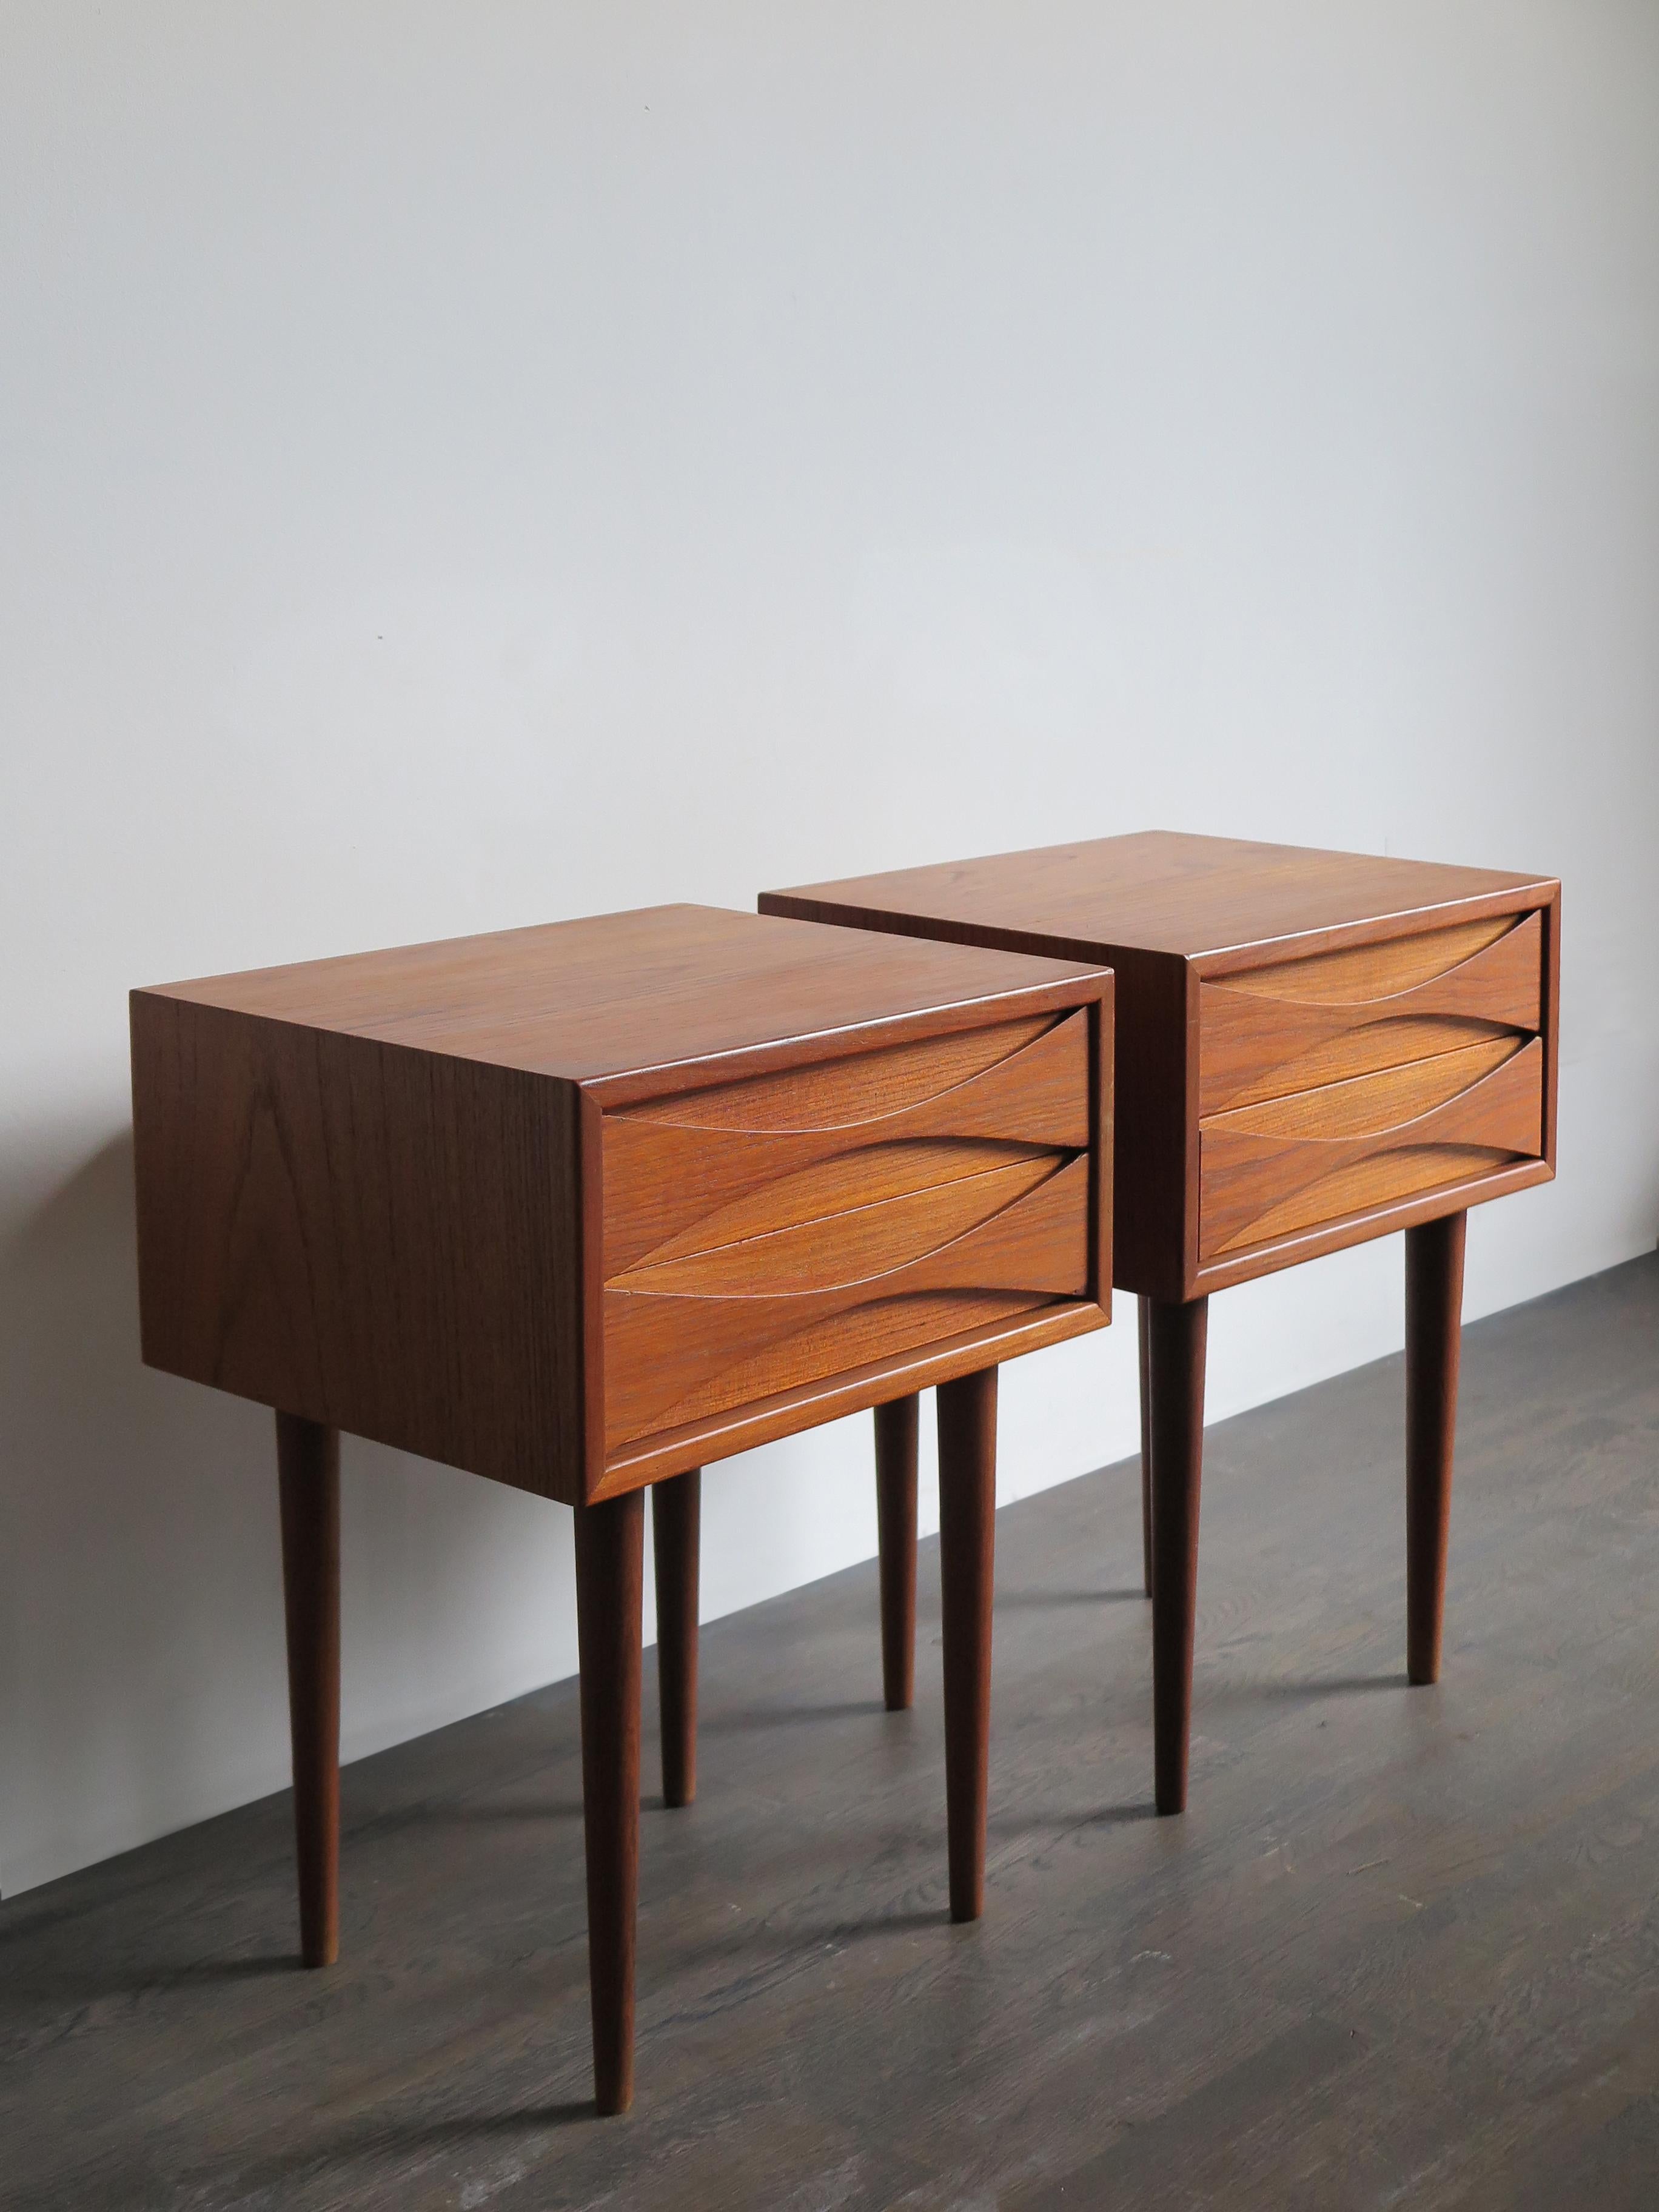 1950s set of two Danish teak nightstands or side table with two drawers designed by Arne Vodder for N.C. Mobler.